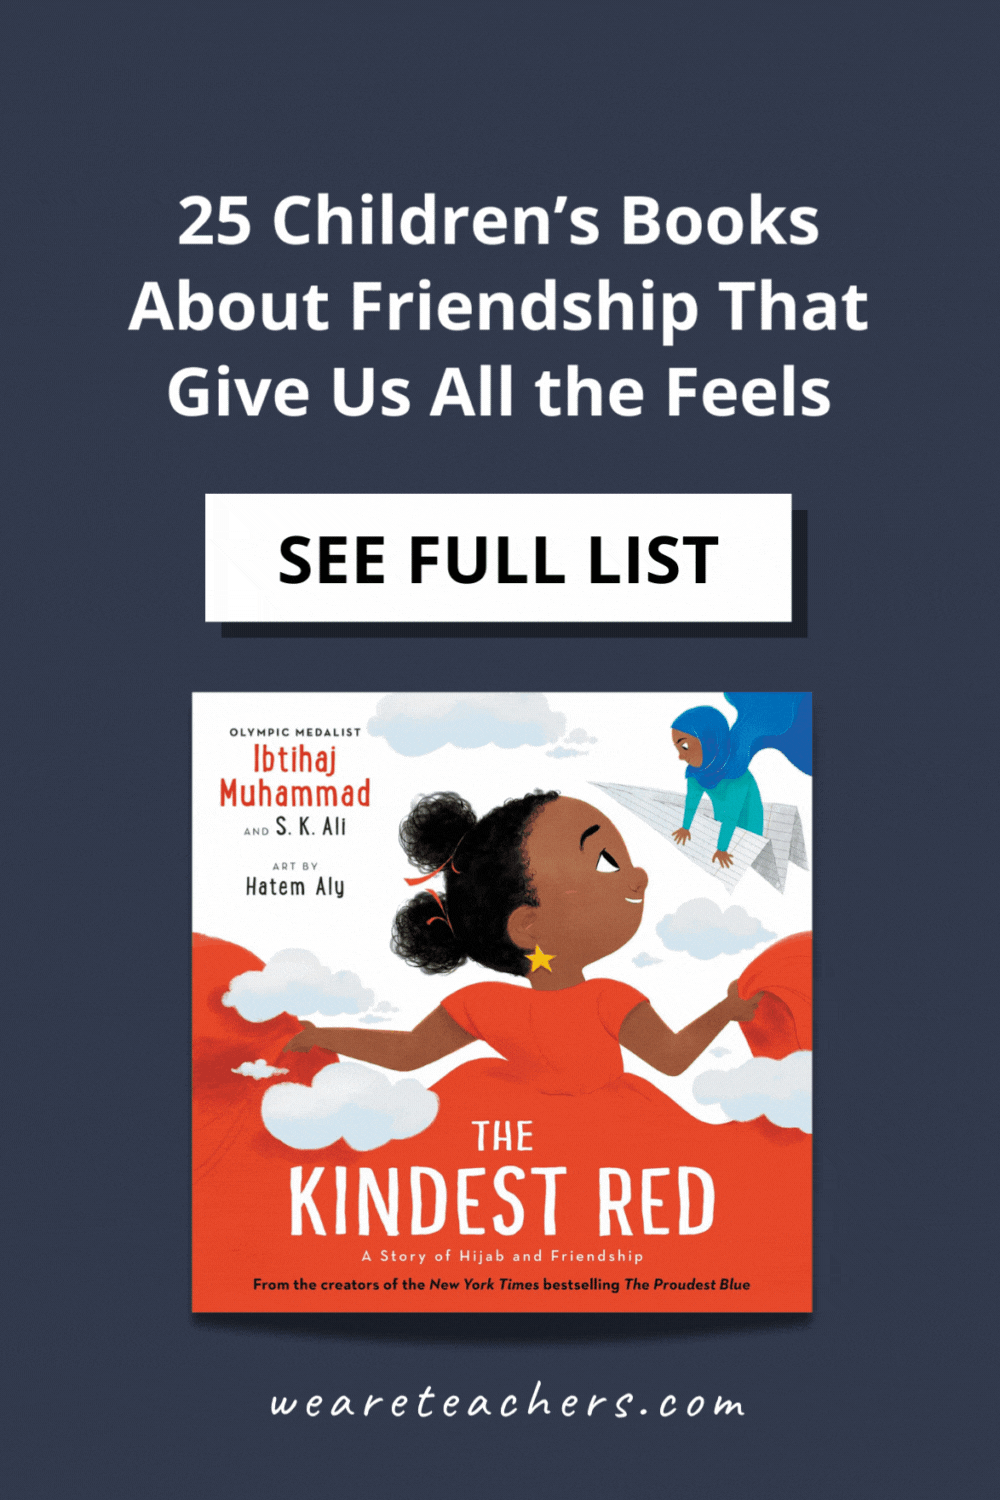 Making new friends, enjoying friends, keeping friends — children's books about friendship are the some of the best for sharing!